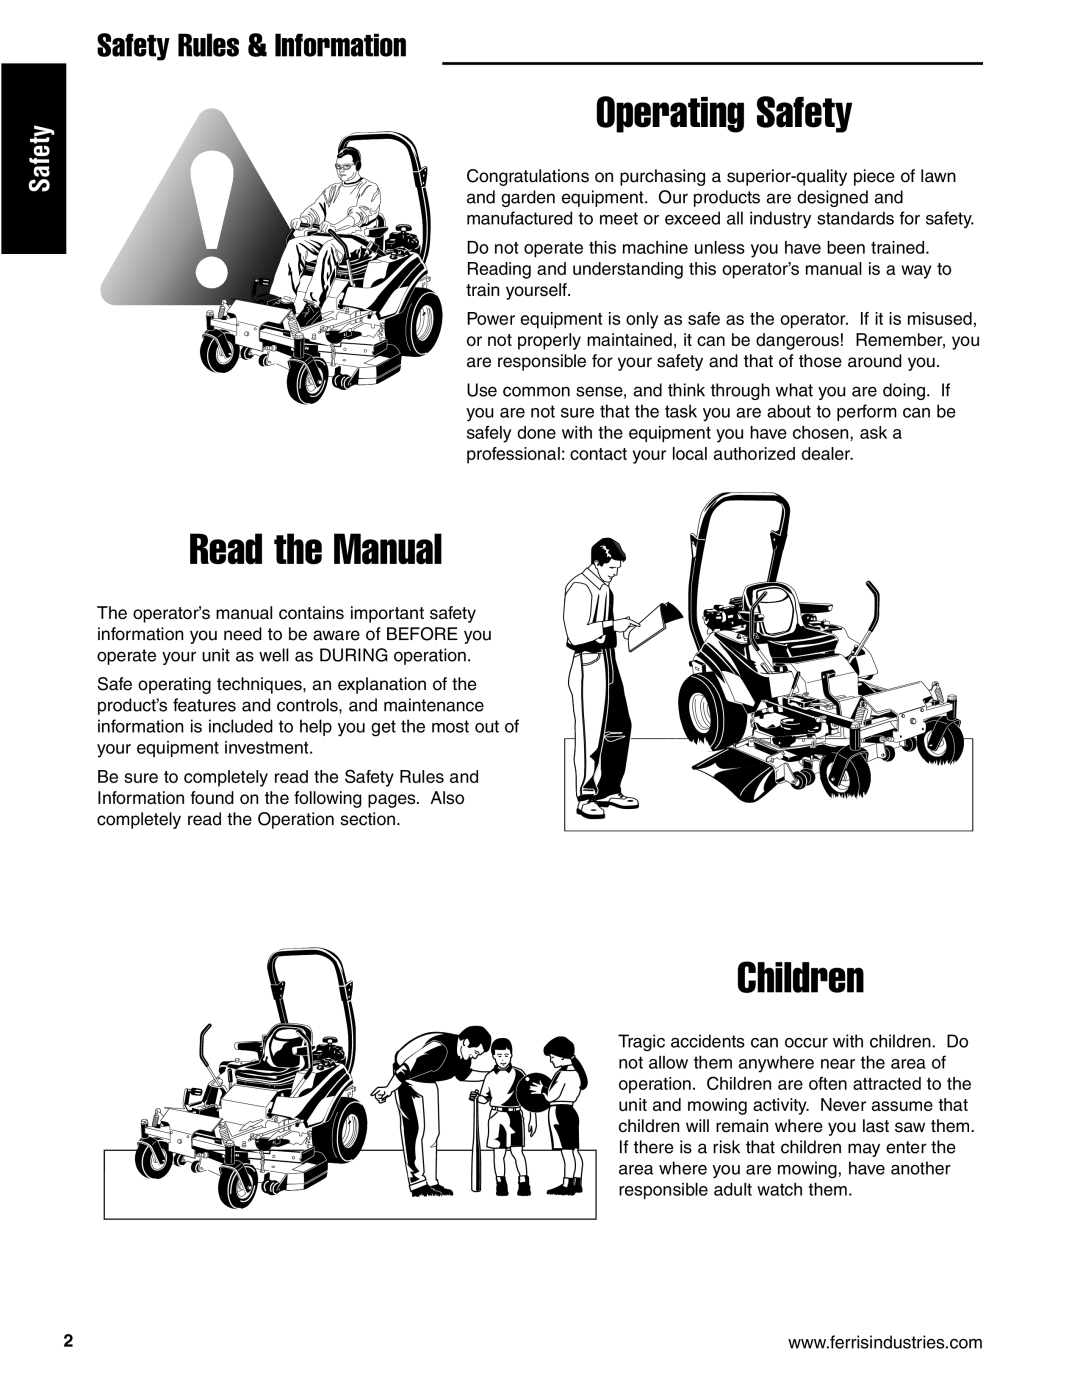 Ferris Industries 5900619, 5901170, 5900629, 5900625 Operating Safety, Read the Manual, Children, Safety Rules & Information 